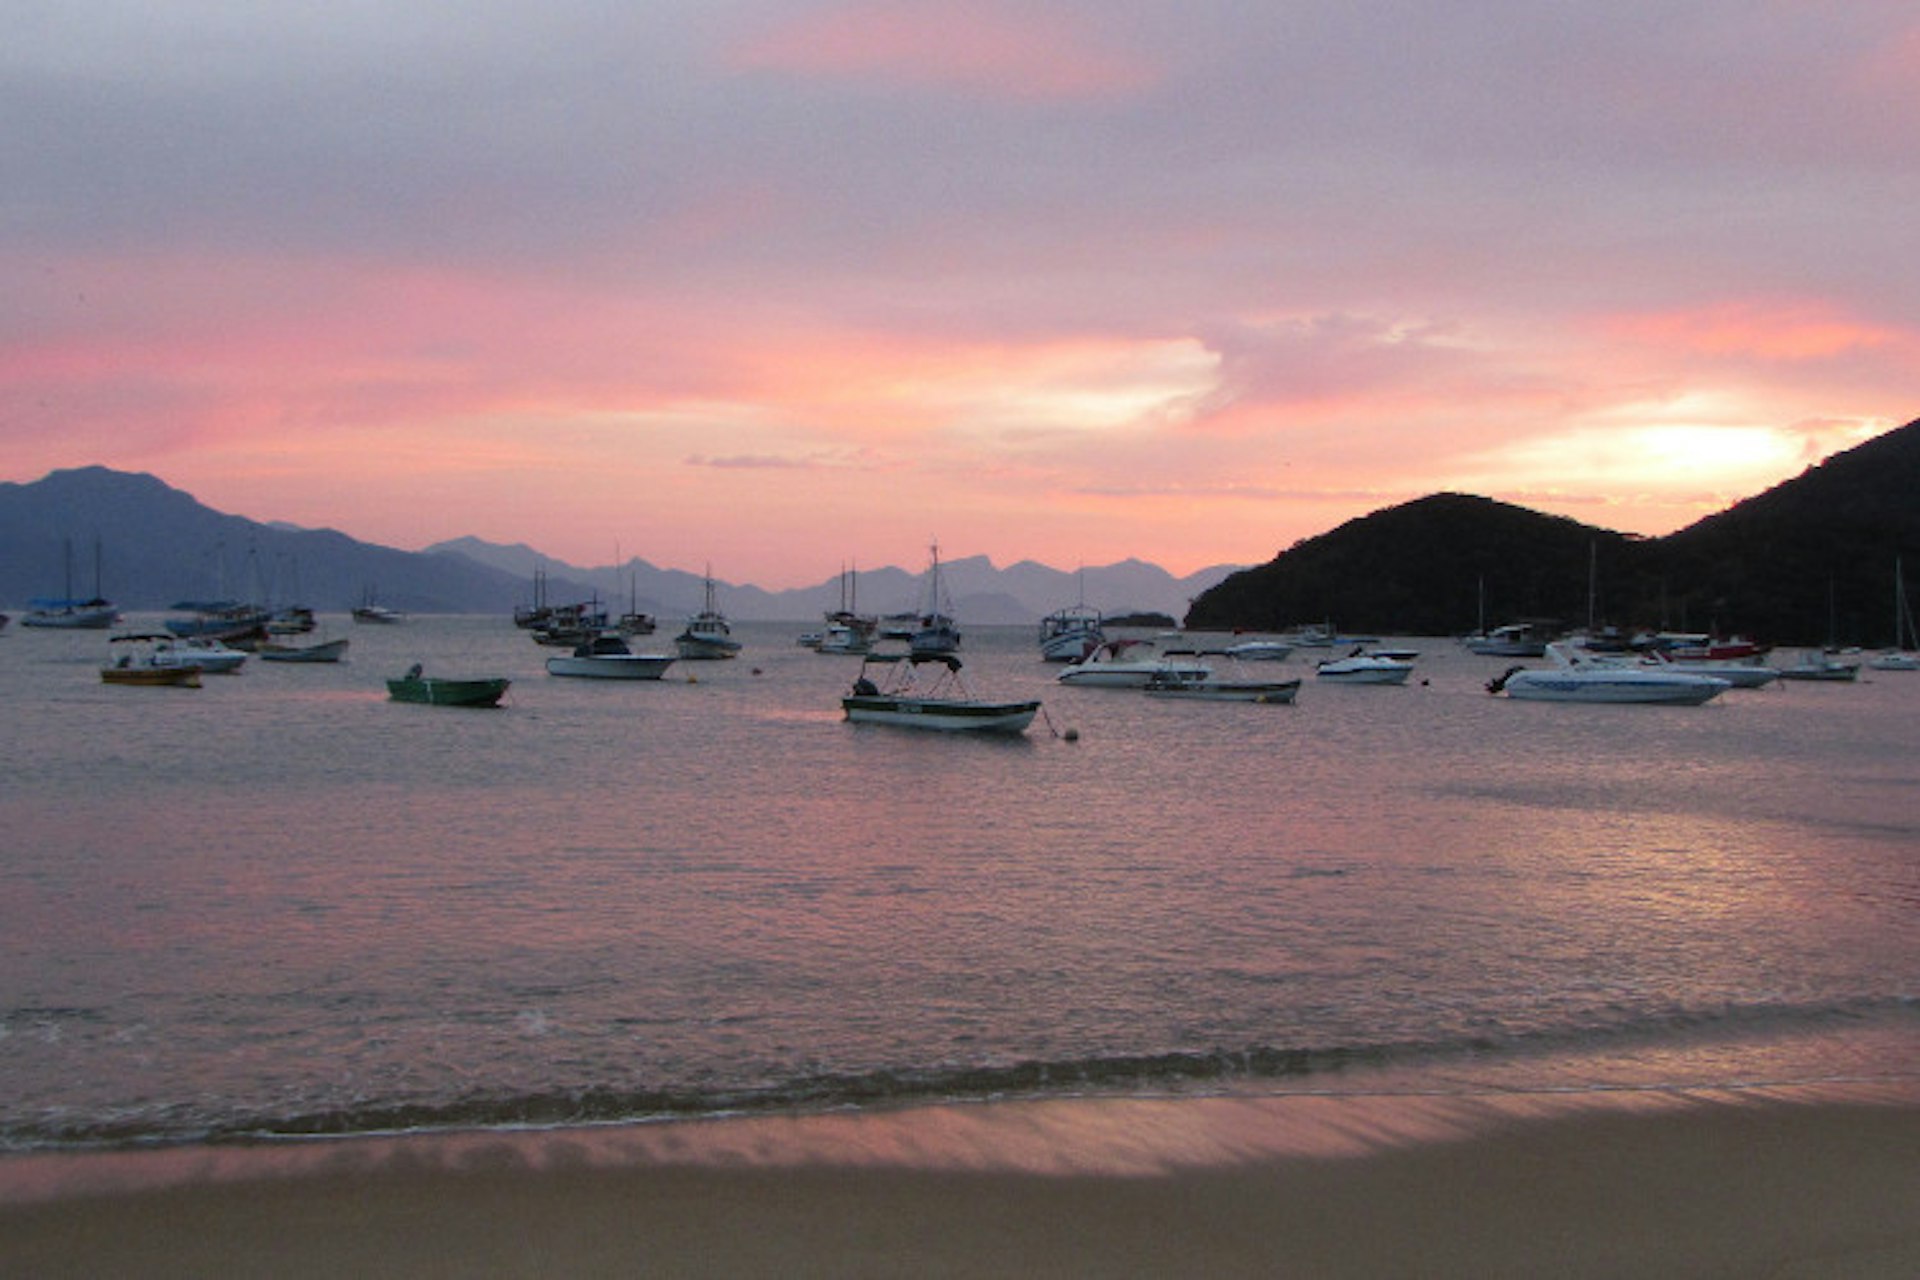 Sublime sunrise from Praia do Canto, Ilha Grande. Image by Gregor Clark / Lonely Planet